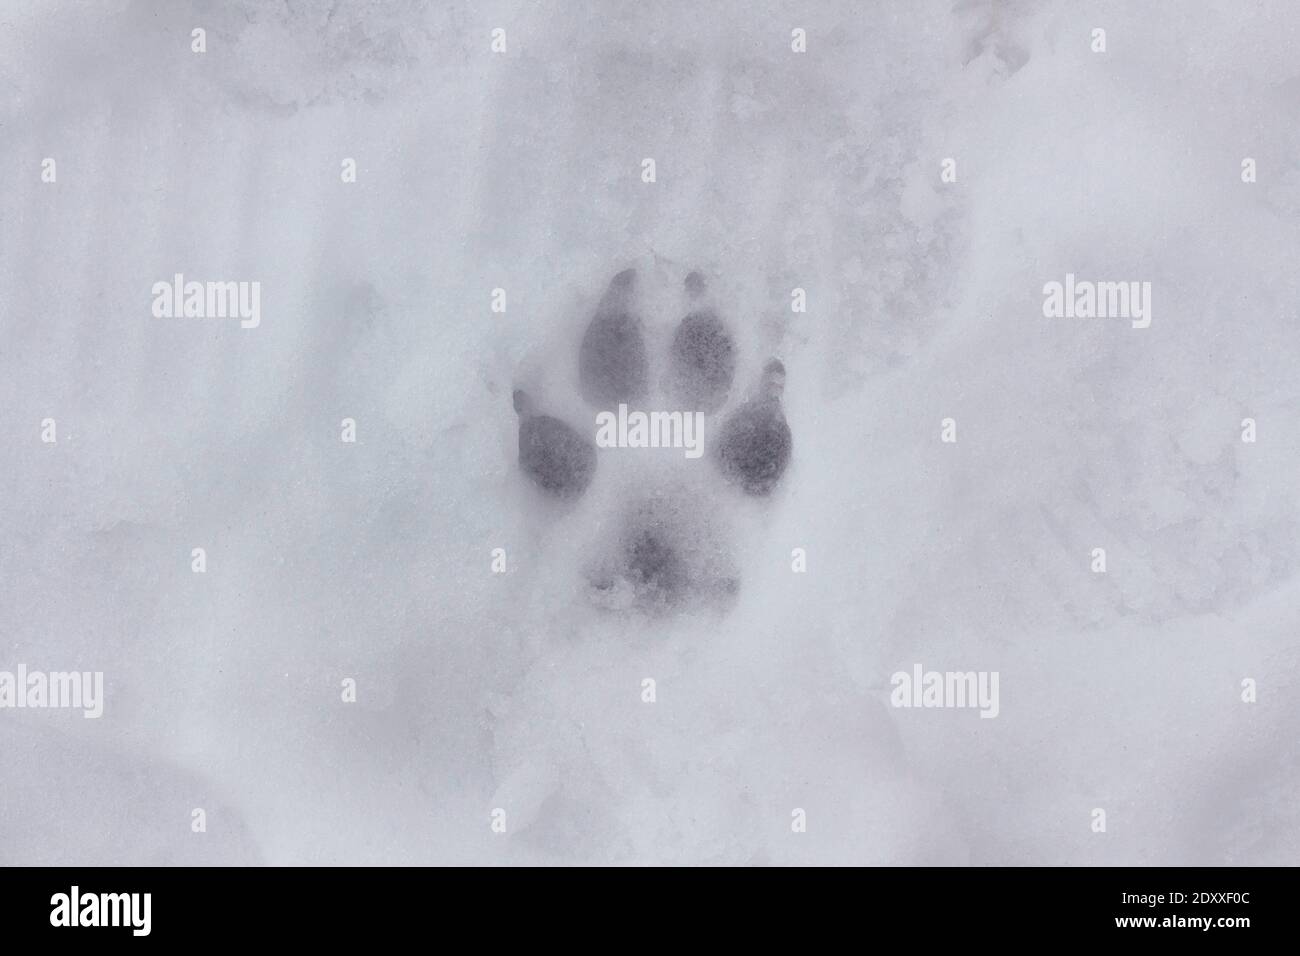 a single dog paw print in the snow during winter, landscape Stock Photo